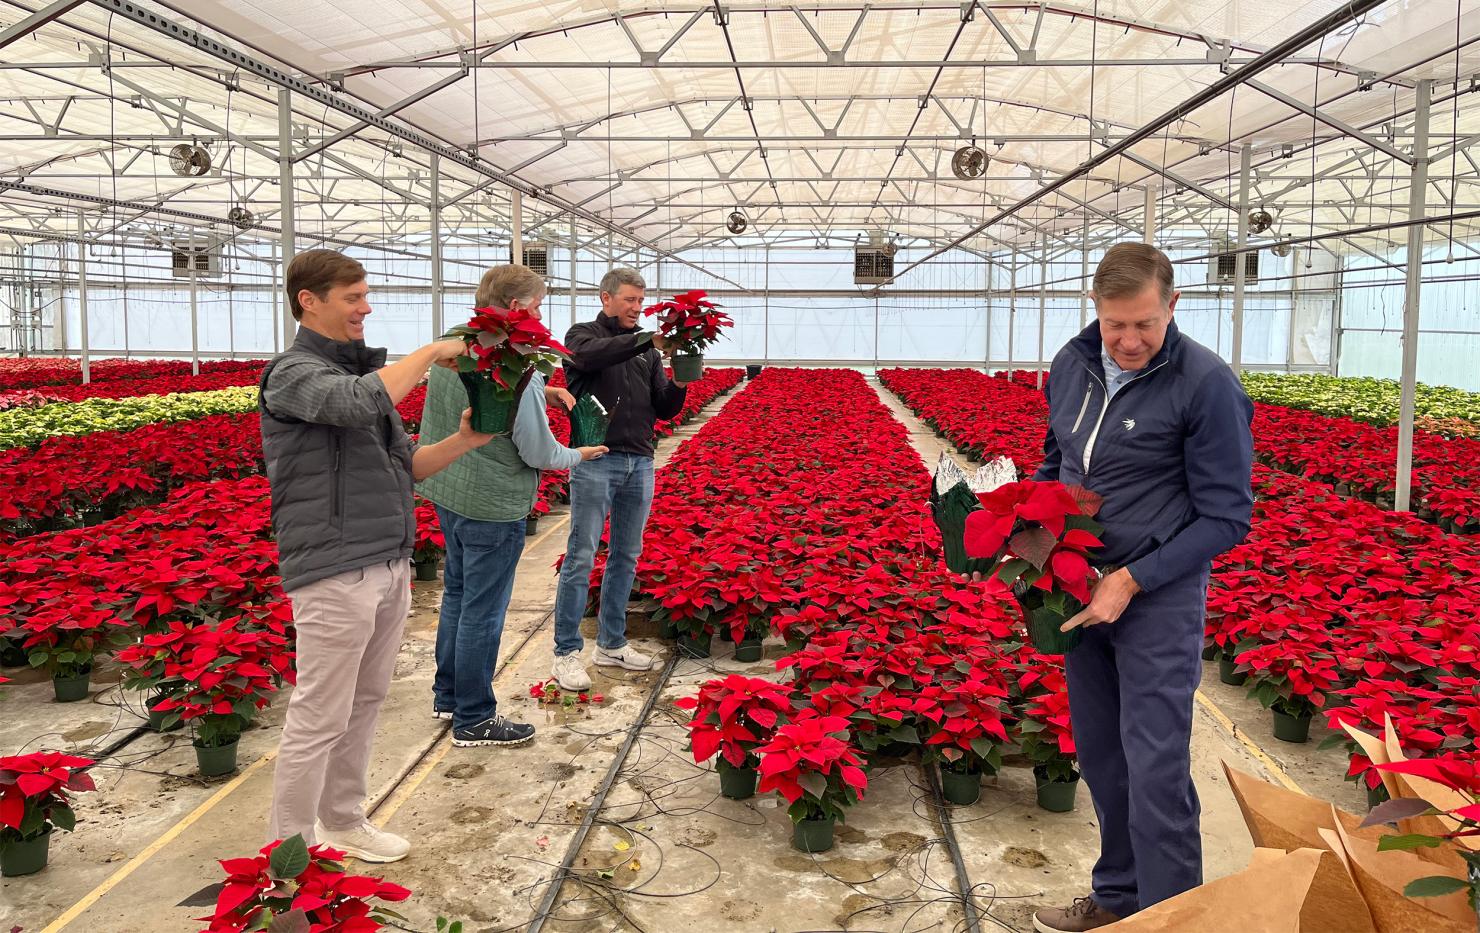 EnCap Partners work on sleeving poinsettias in the large greenhouse.